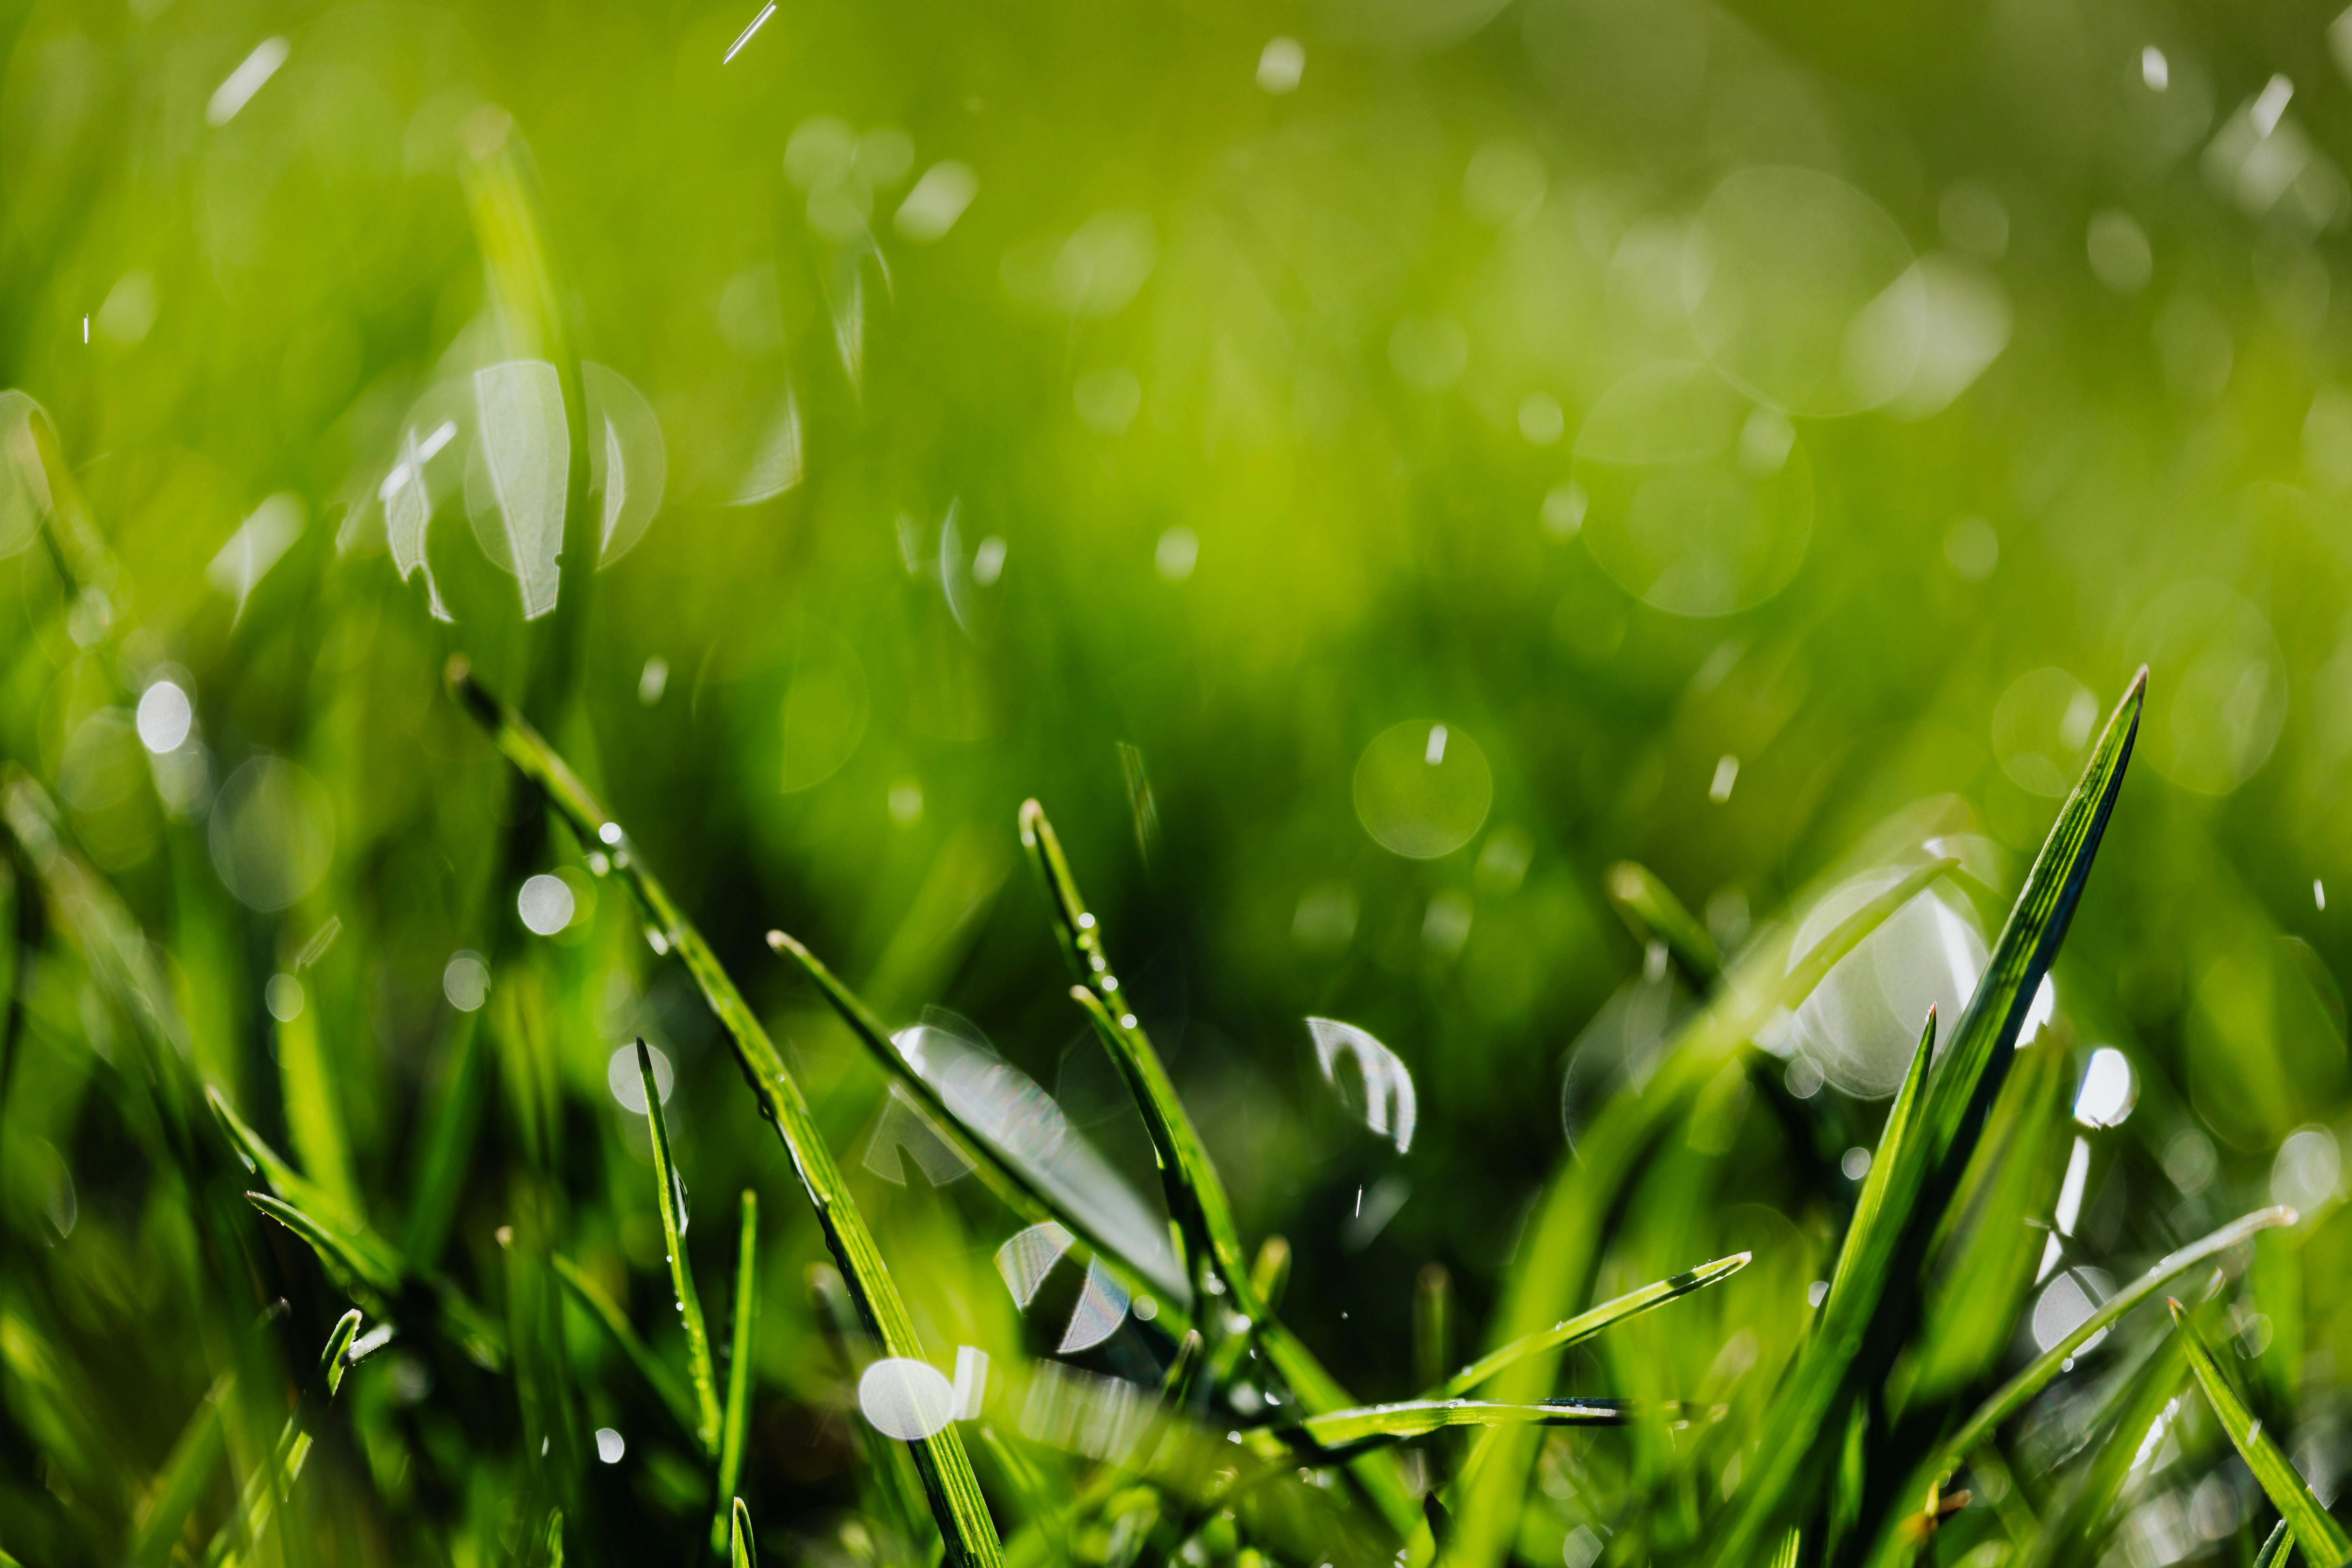 Bright green grass growing on ground · Free Stock Photo